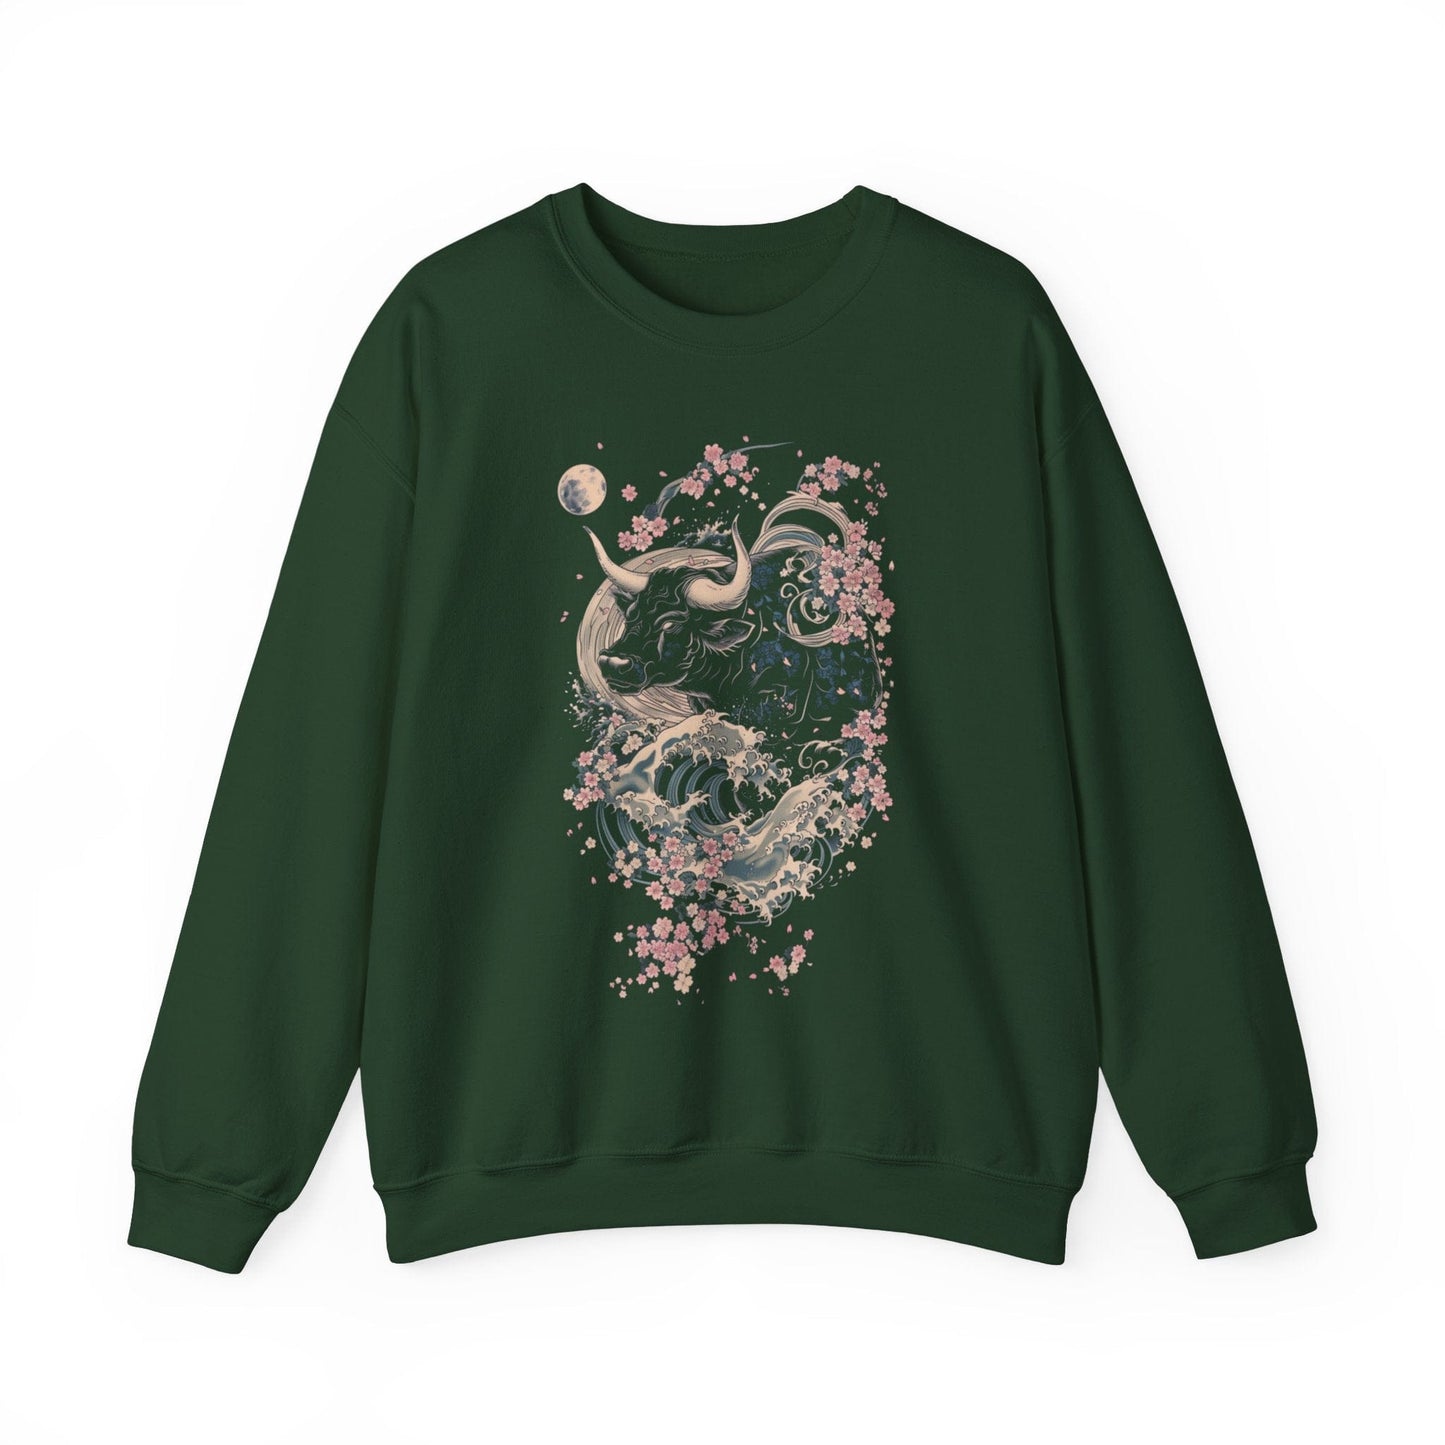 Sweatshirt S / Forest Green Taurus Blossom Embrace Sweater: Serenity in Bloom